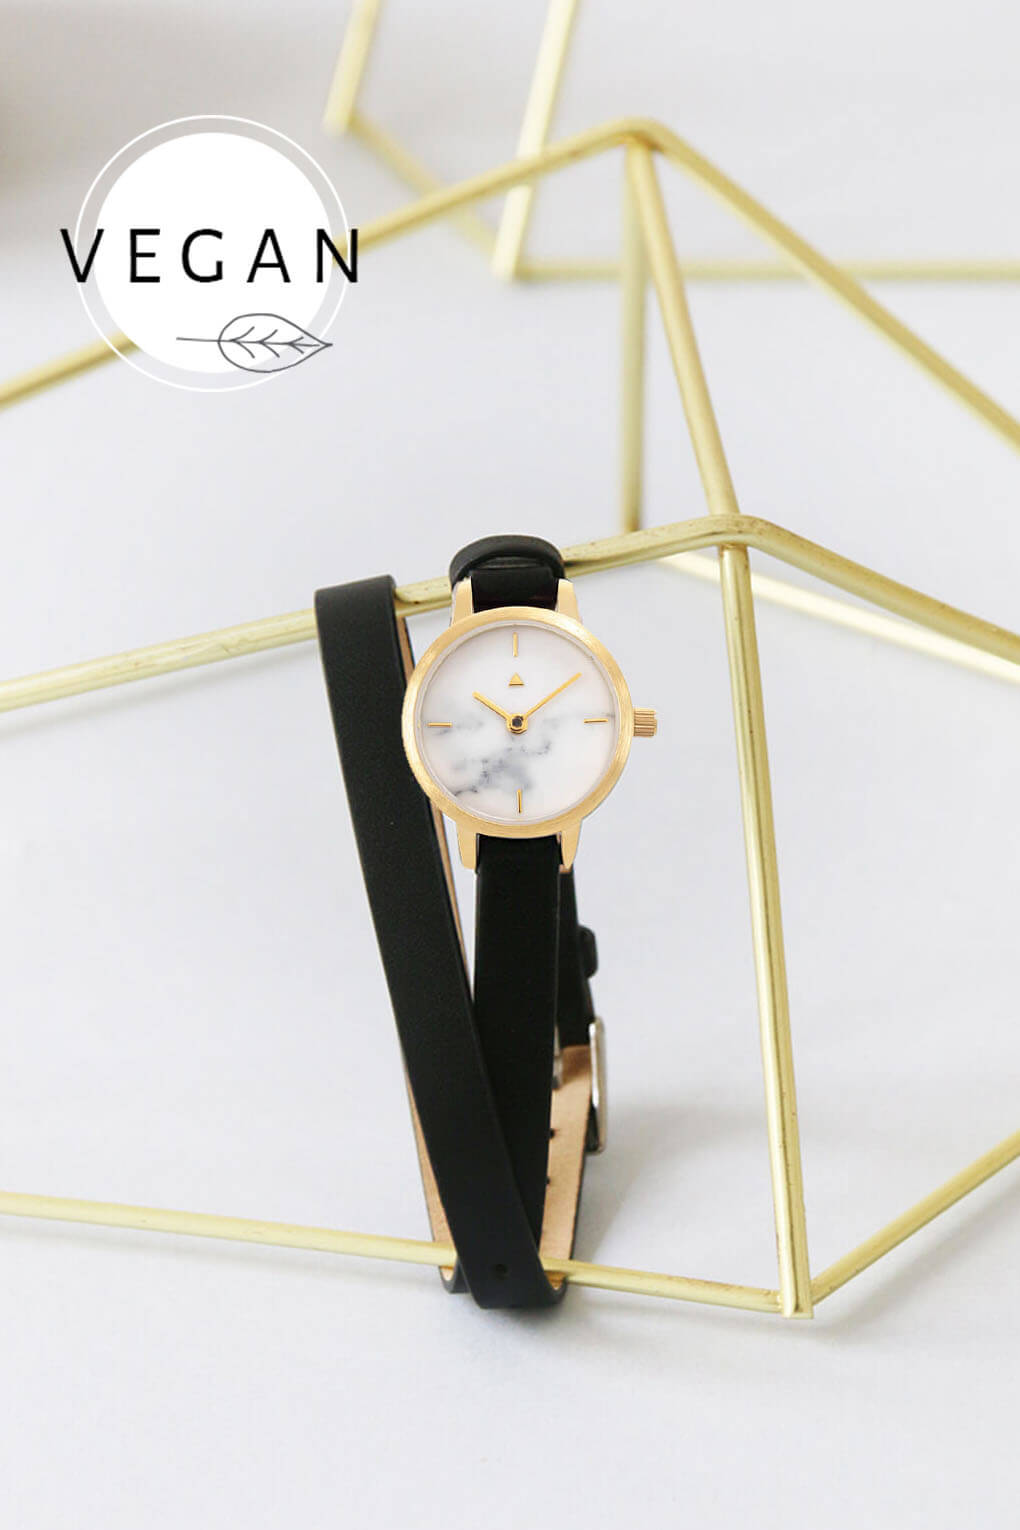 22 MM WATCH IN GOLD AND BLACK – VEGAN